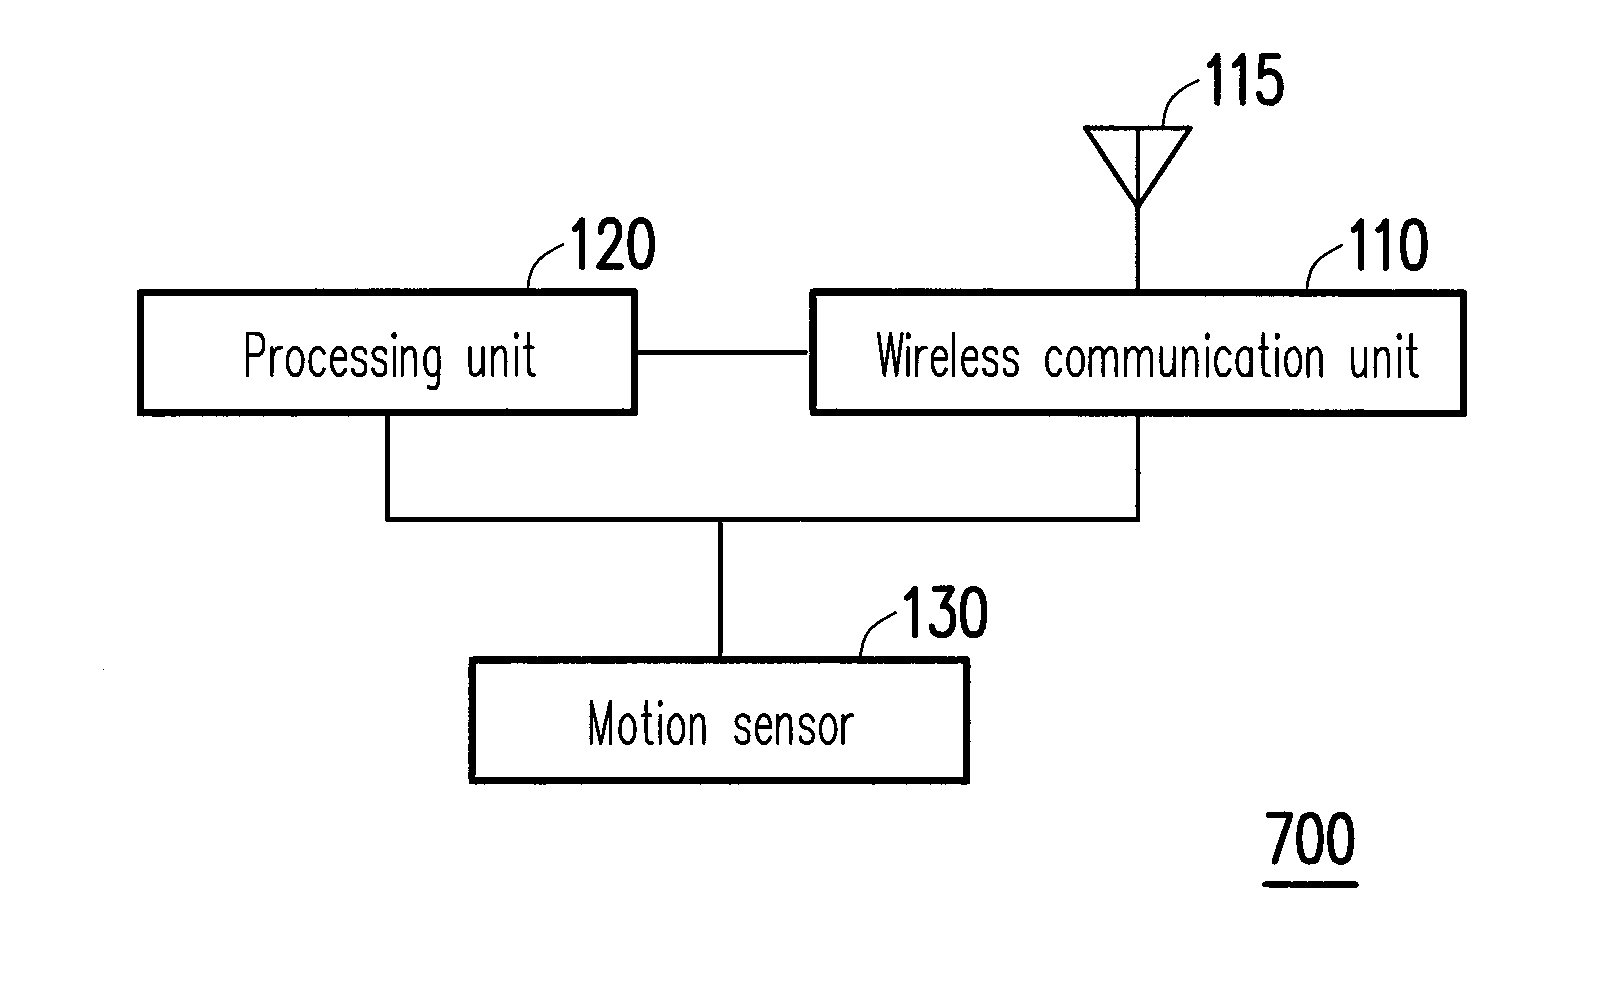 Method for searching wireless signal, mobile electronic device using the same, and non-transitory storage medium